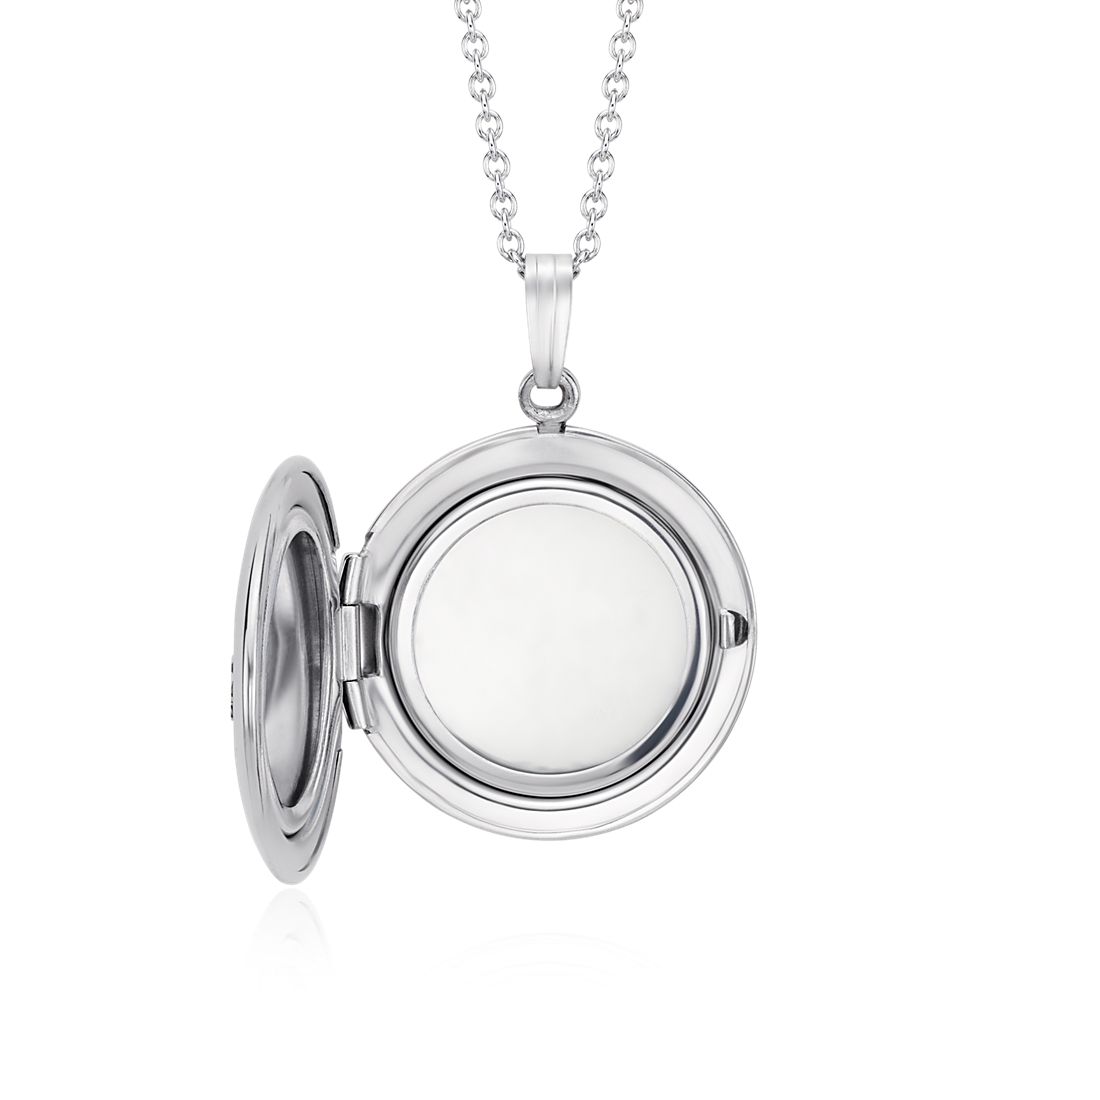 Sterling silver locket, the locket is empty and open